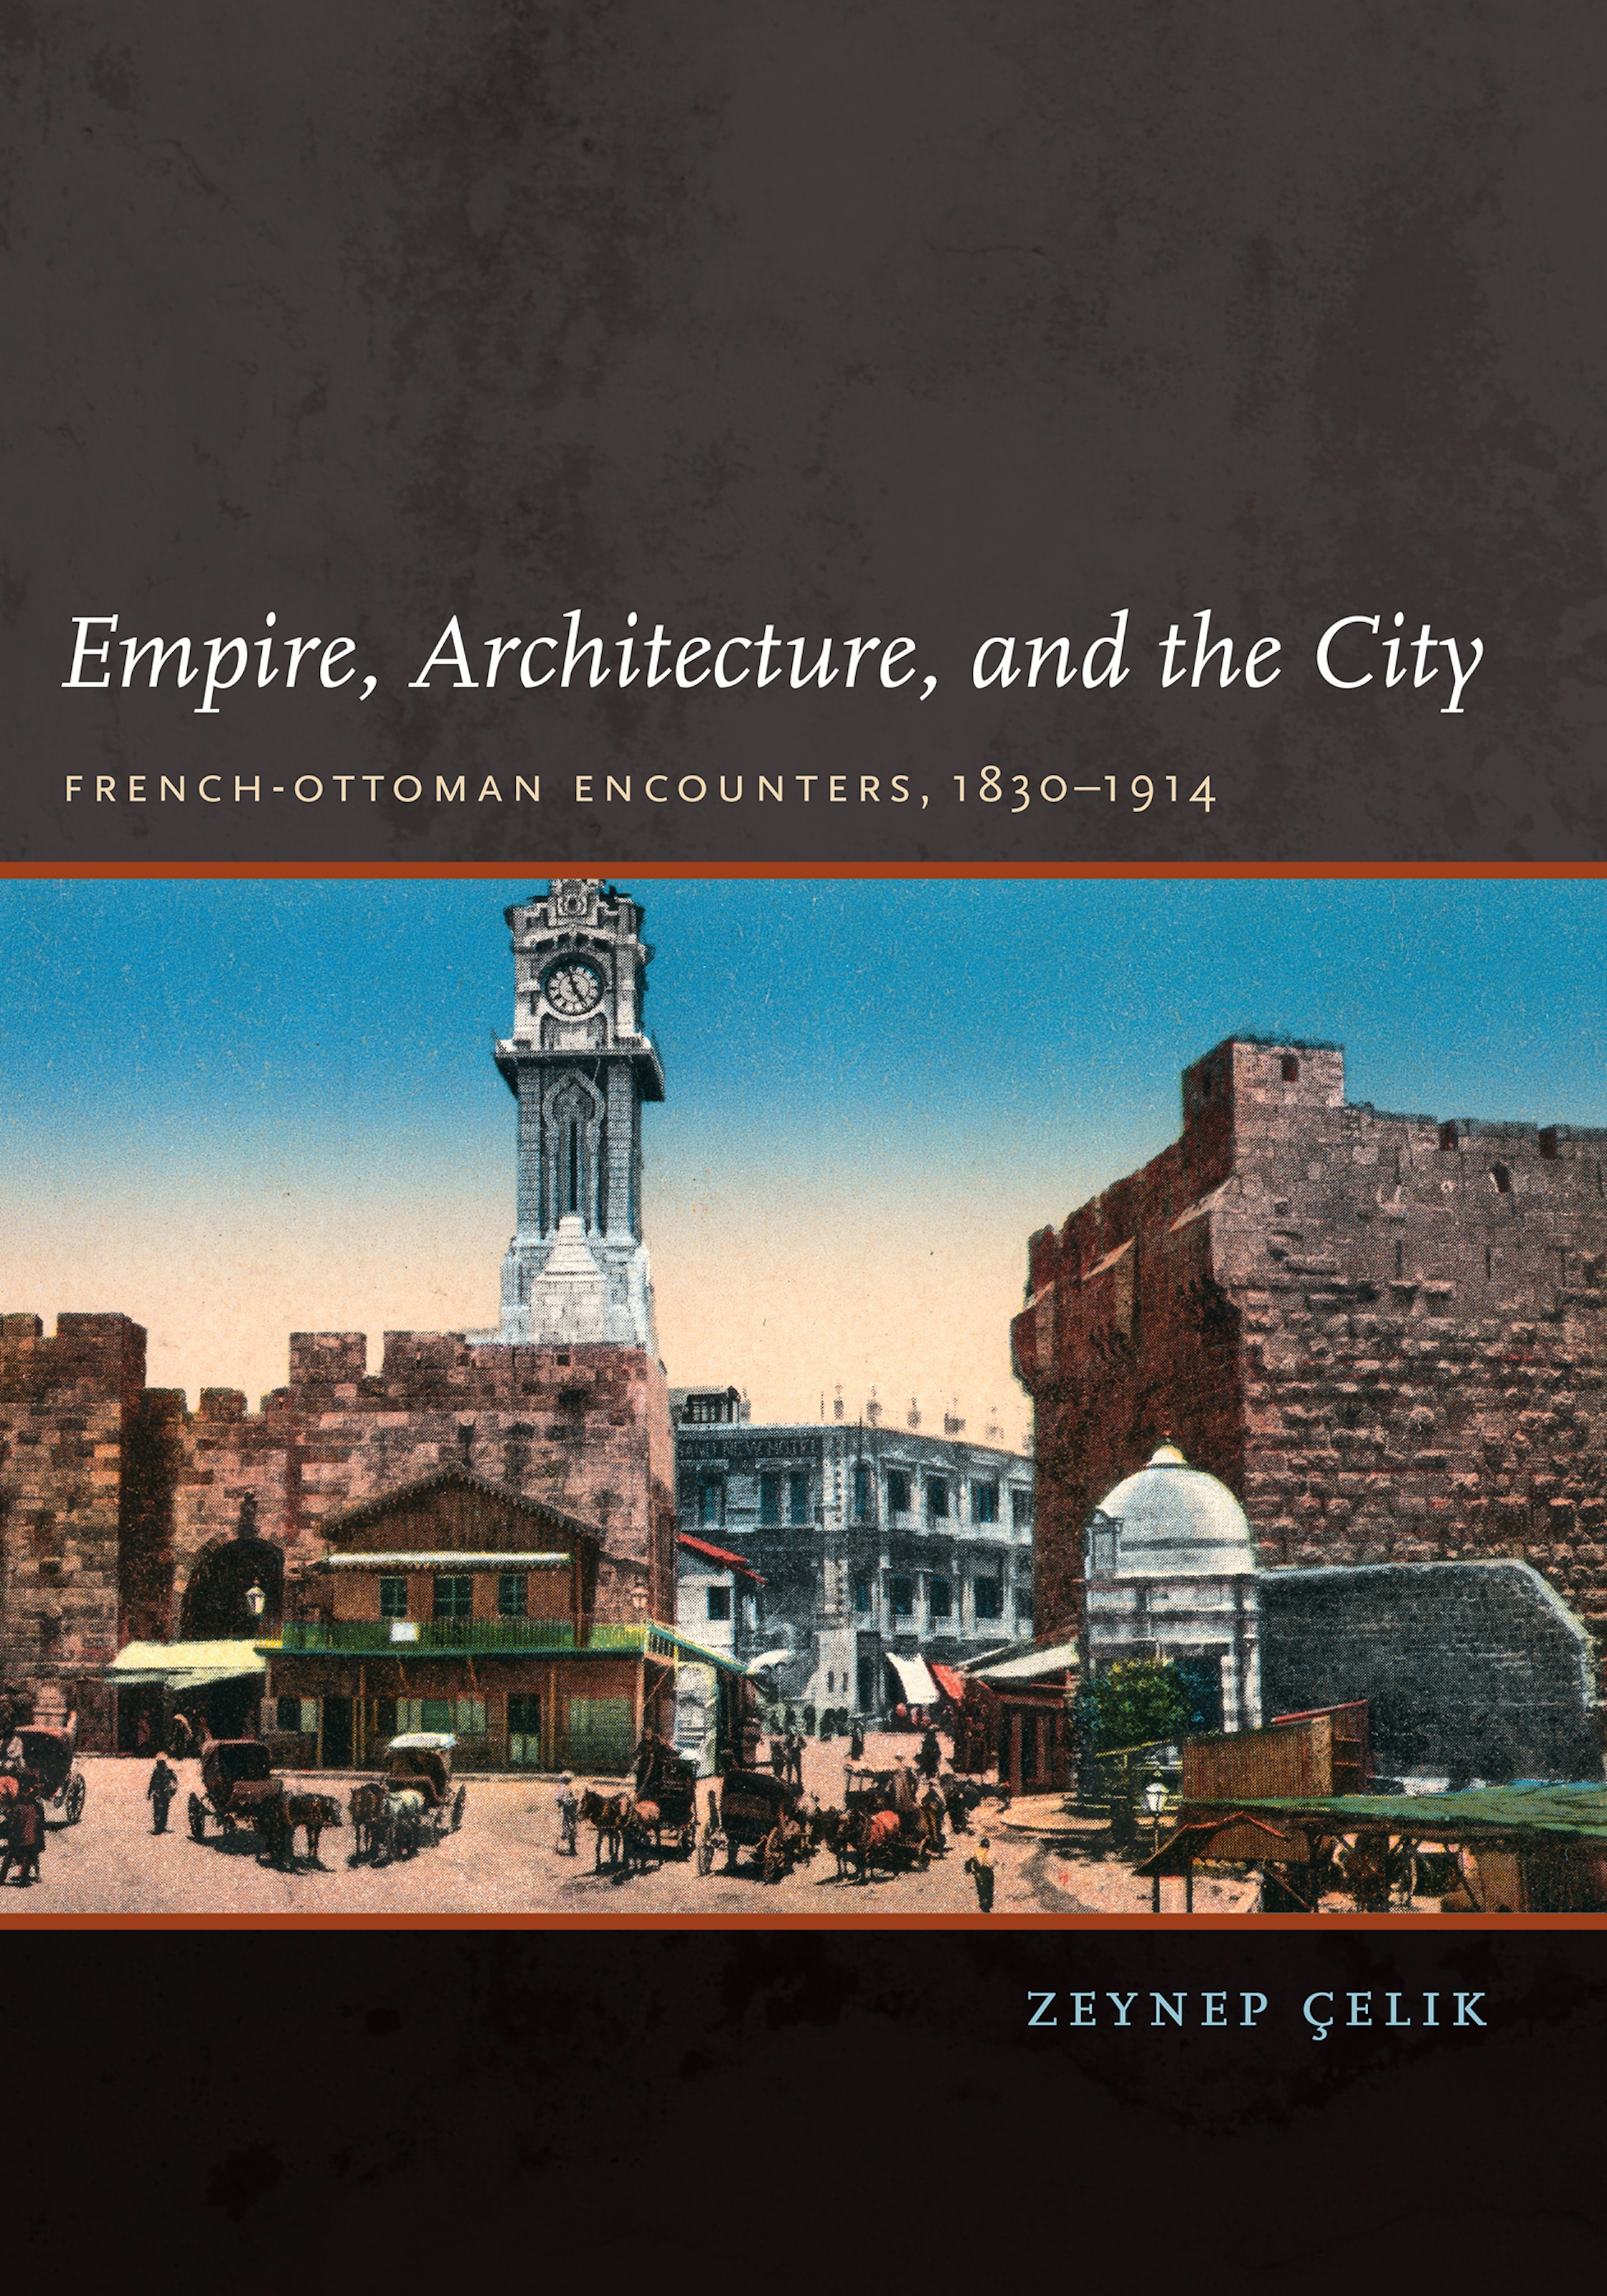 Empire, Architecture, and the City